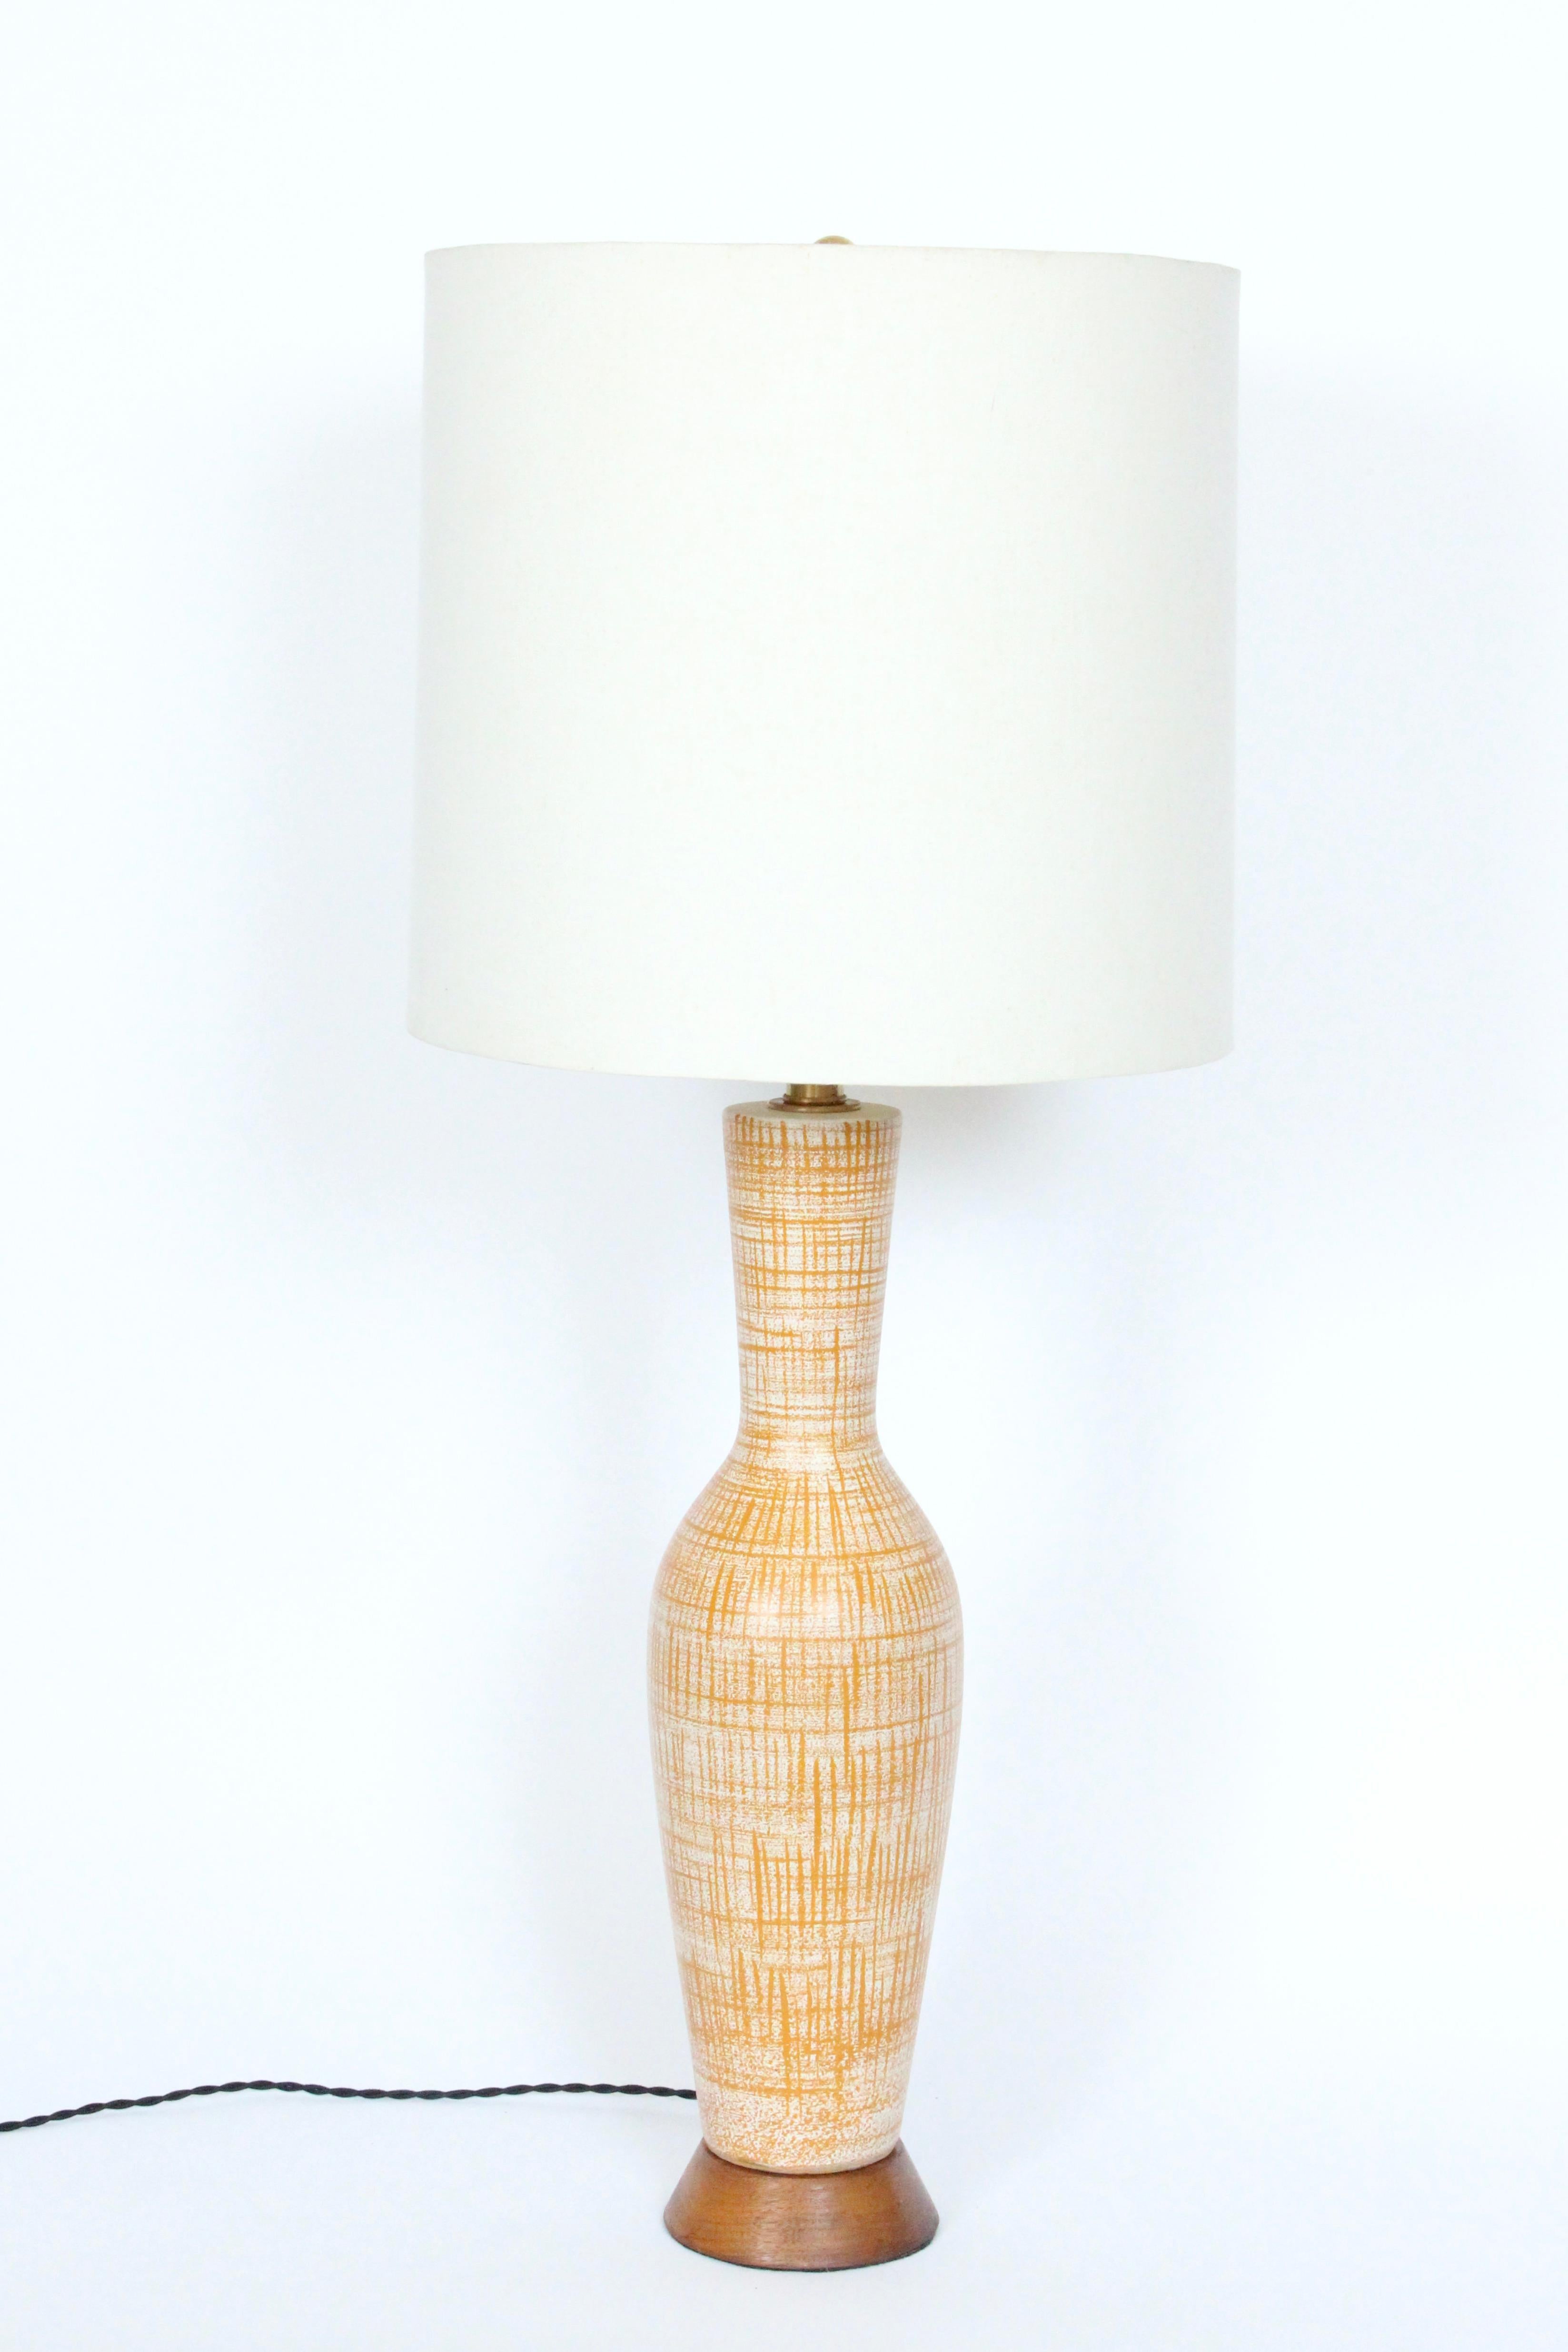 Tall Design Technics Pottery White Table Lamp with Woven Rust Pattern, 1950's For Sale 6